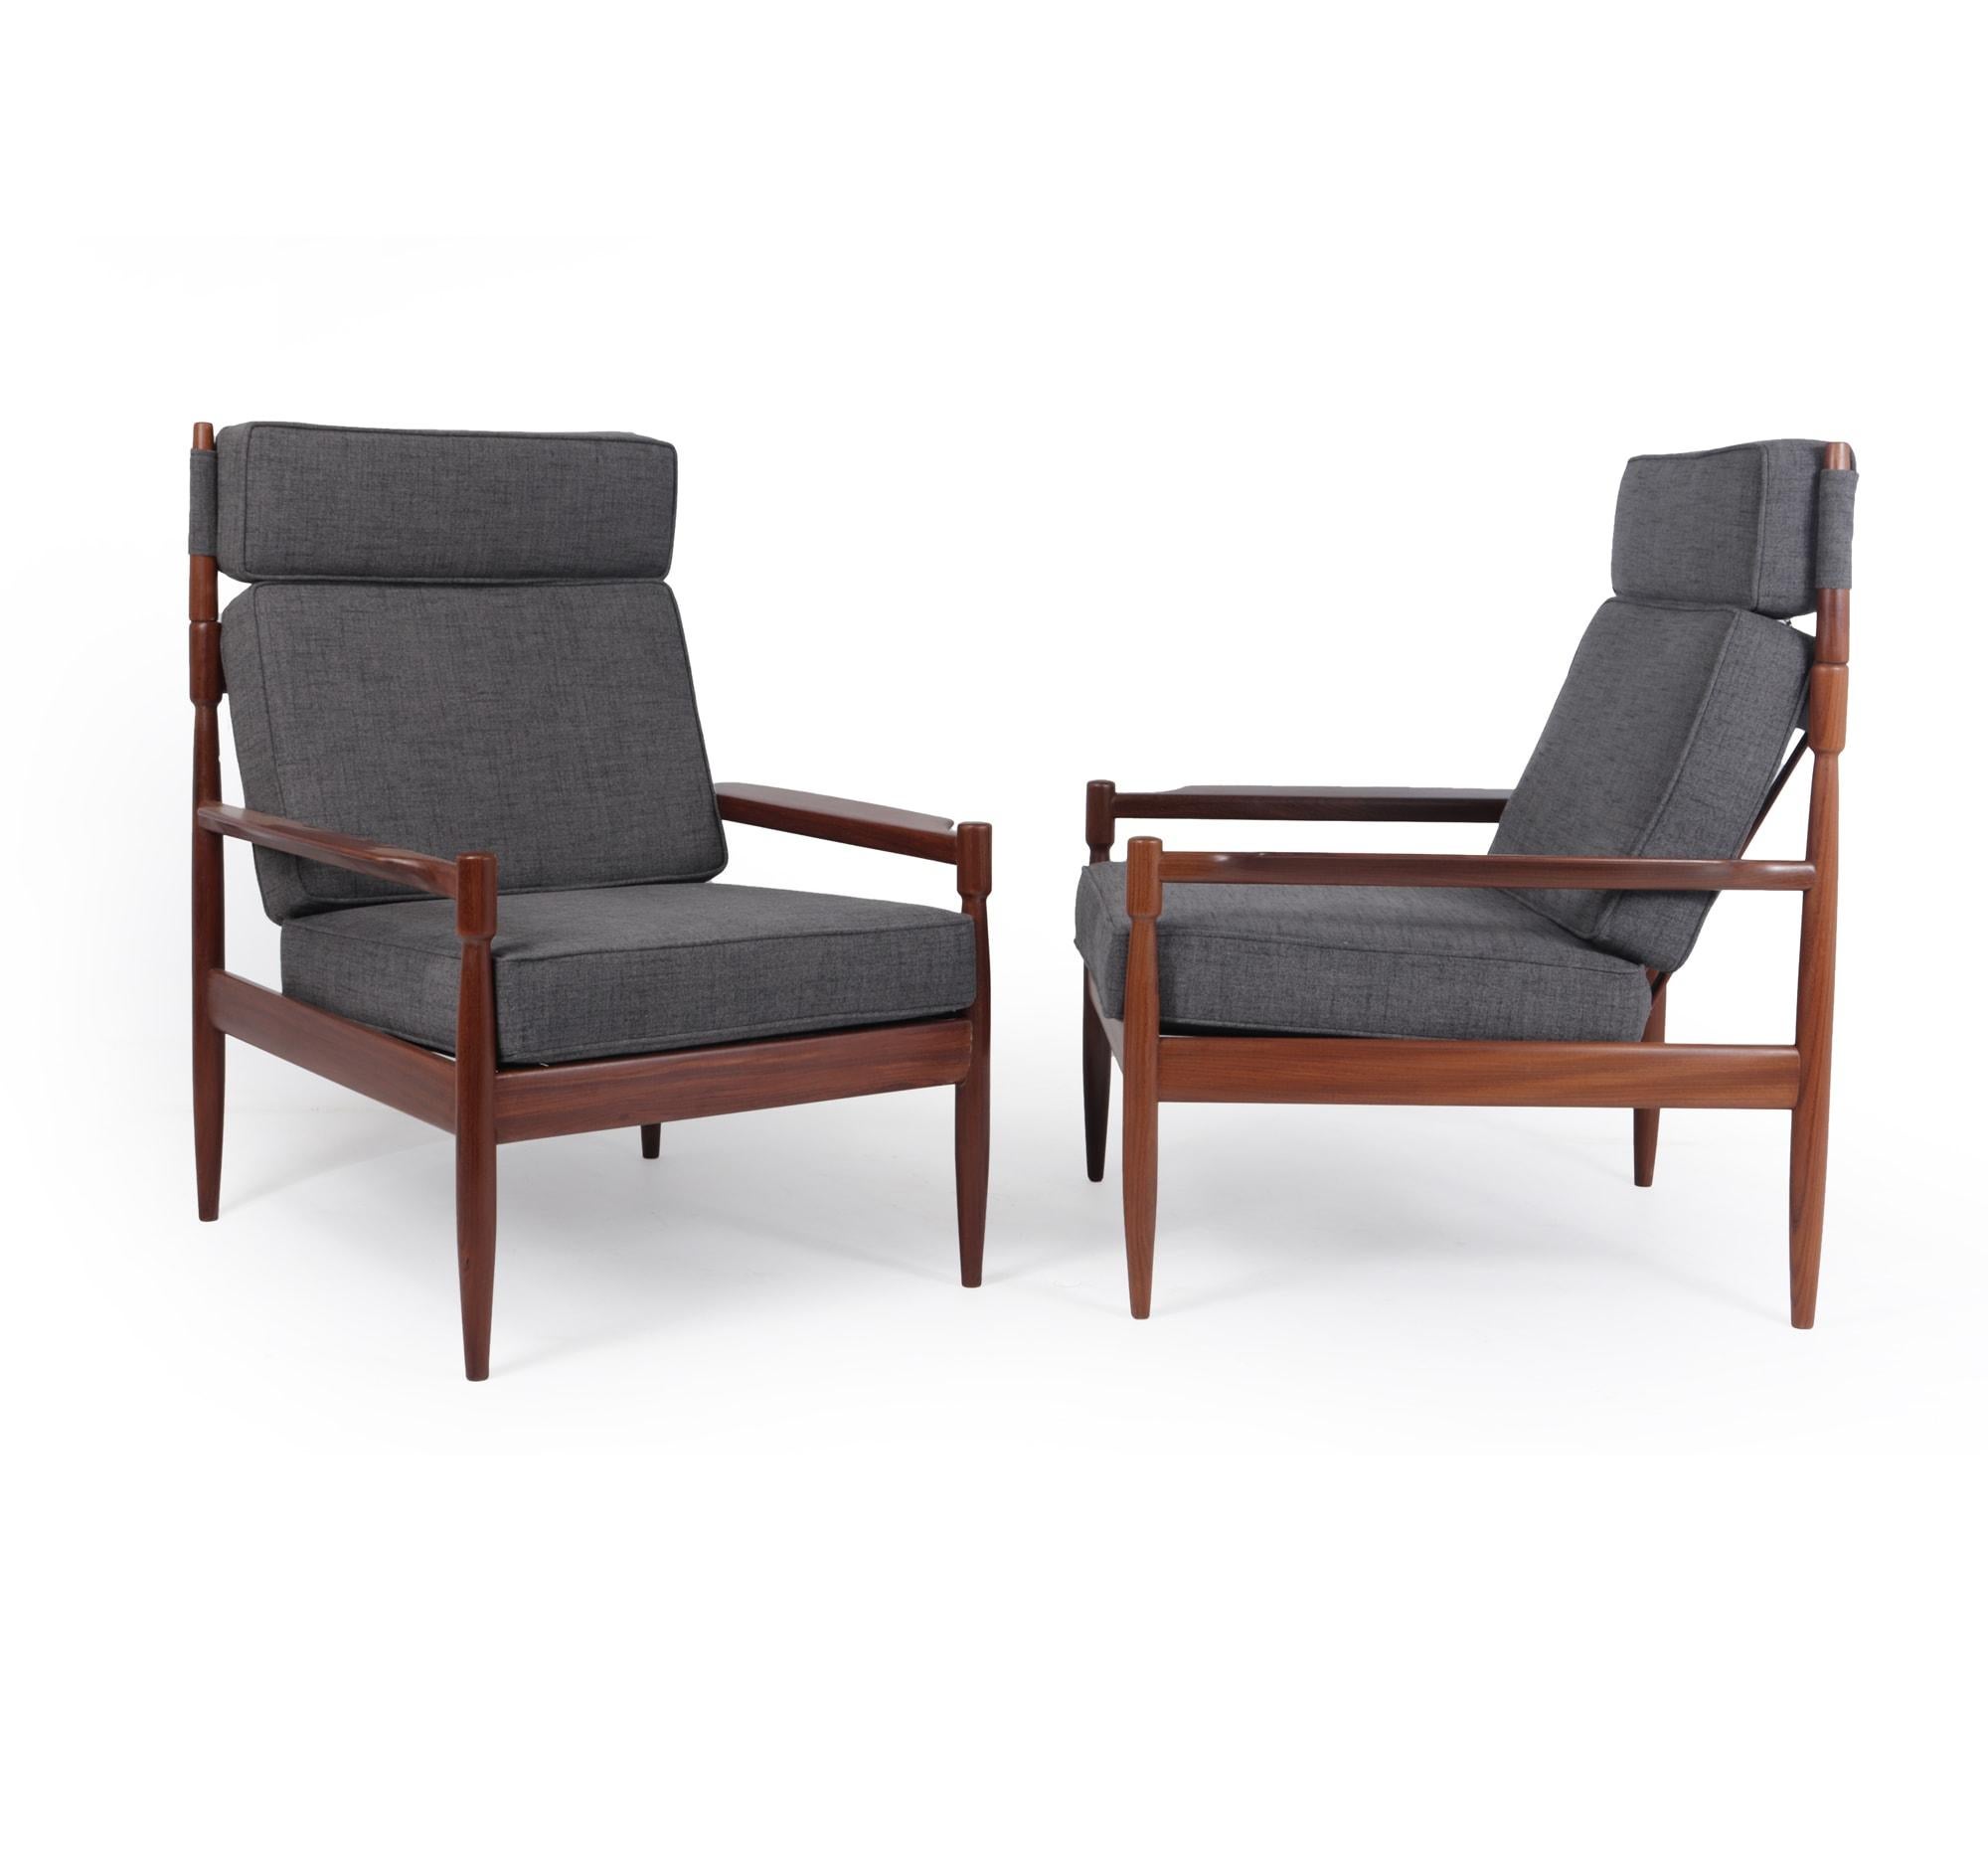 Pair of mid century Danish teak armchairs c1960

A Pair of Danish produced armchairs produced in solid Afromosia with good strong construction and very unusual and stylish with horned uprights to hold the head cushion, the frames have been fully